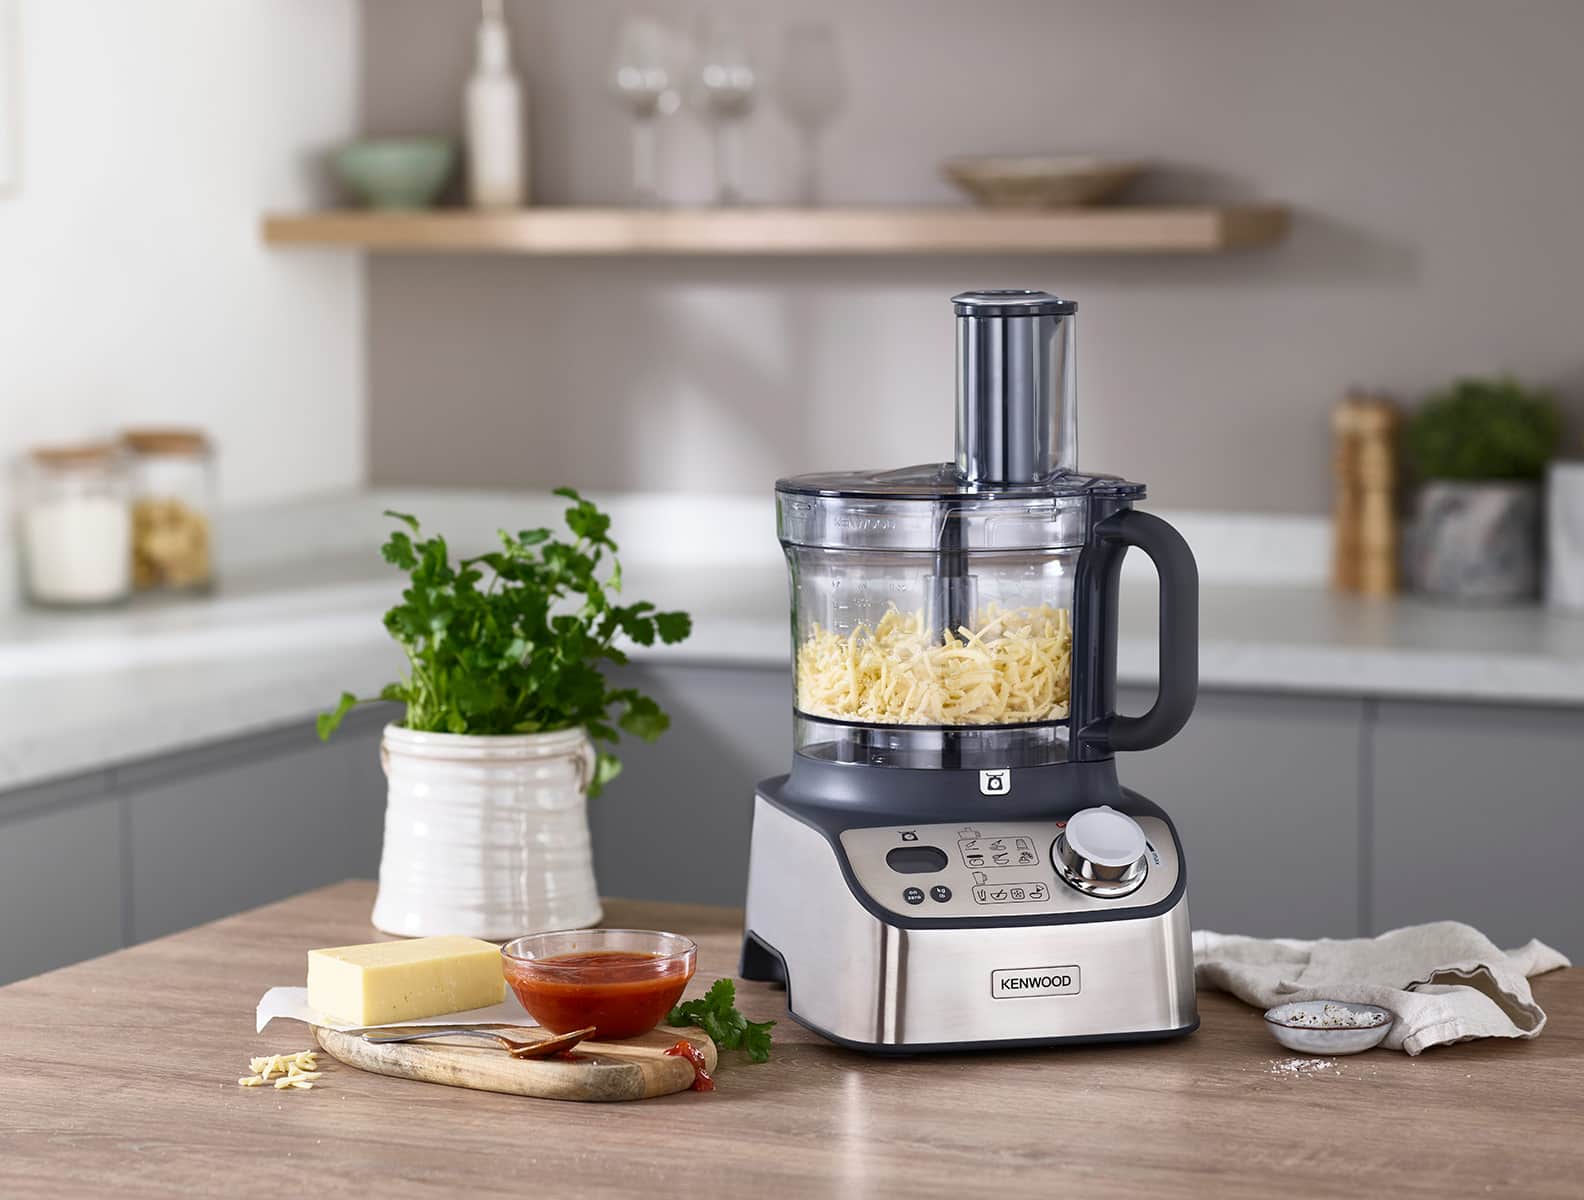 Food processor discs and blades explained